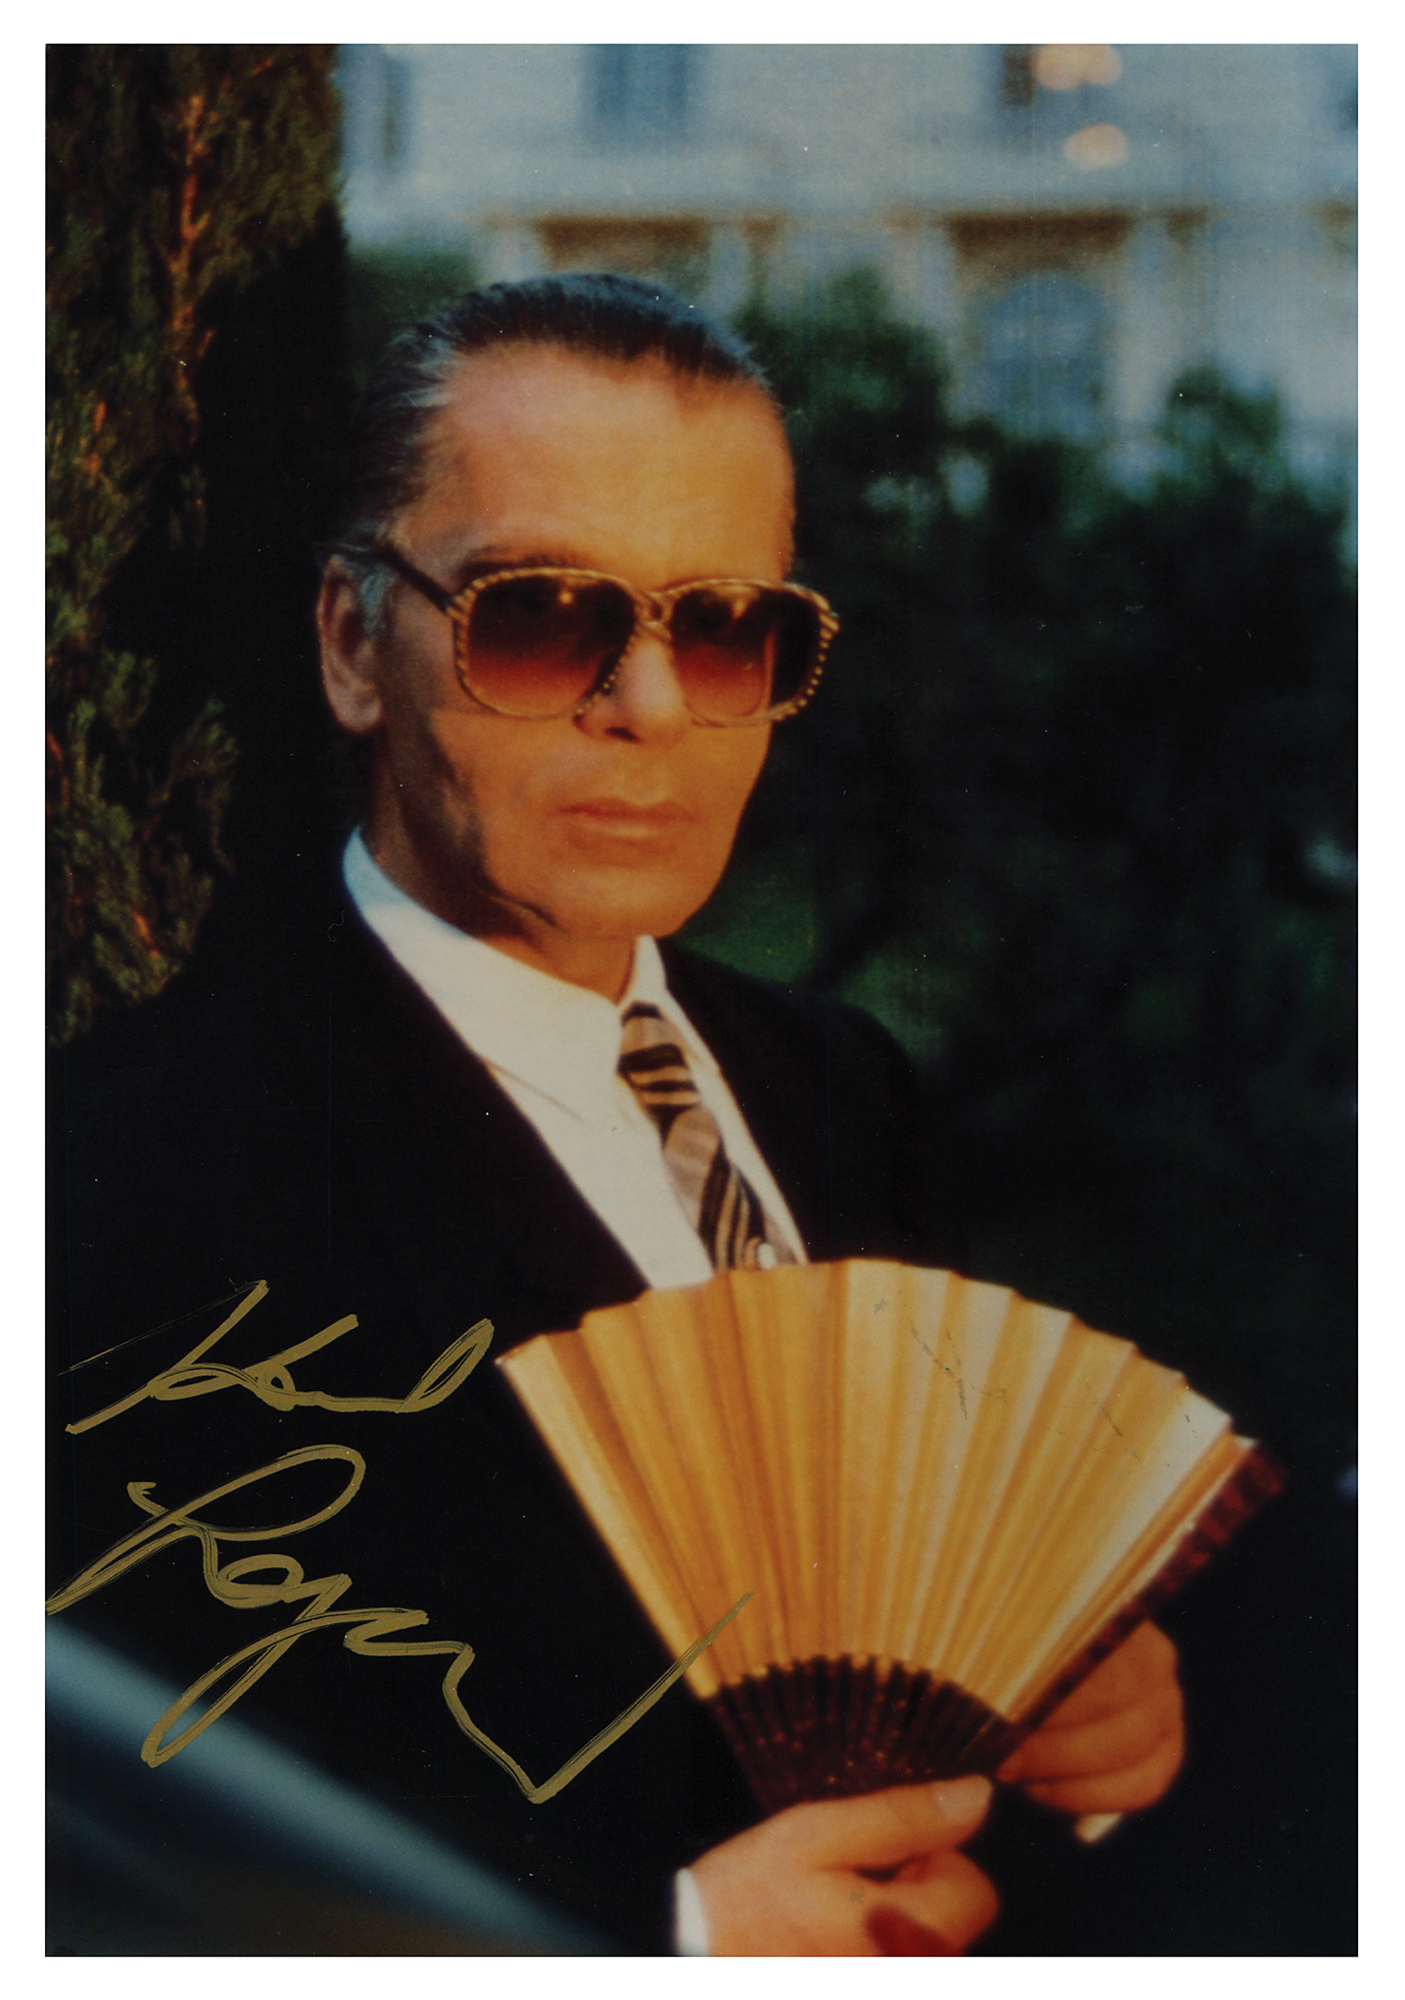 Lot #427 Karl Lagerfeld Signed Photograph